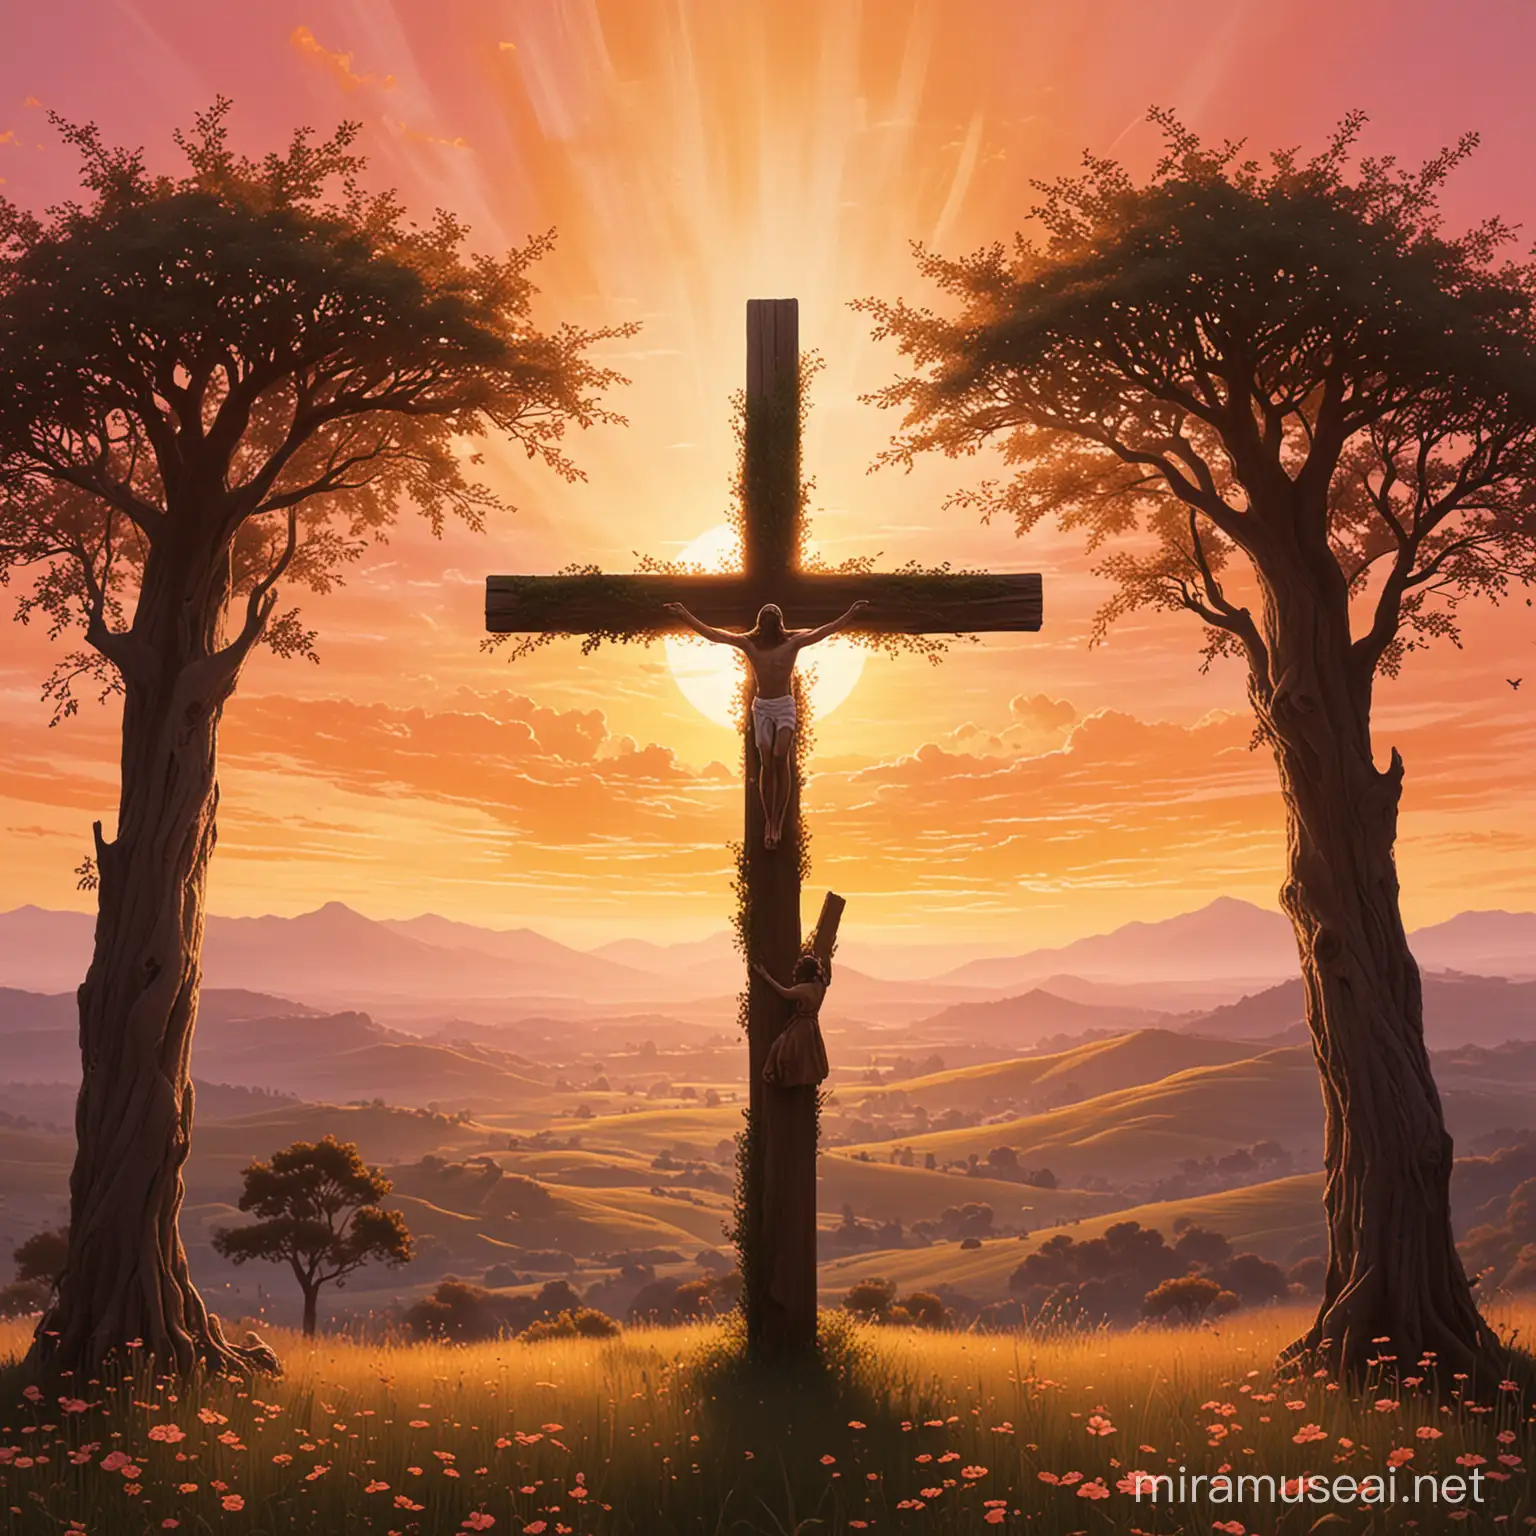 Divine Love Tranquil Sunset Landscape with Cross Silhouette